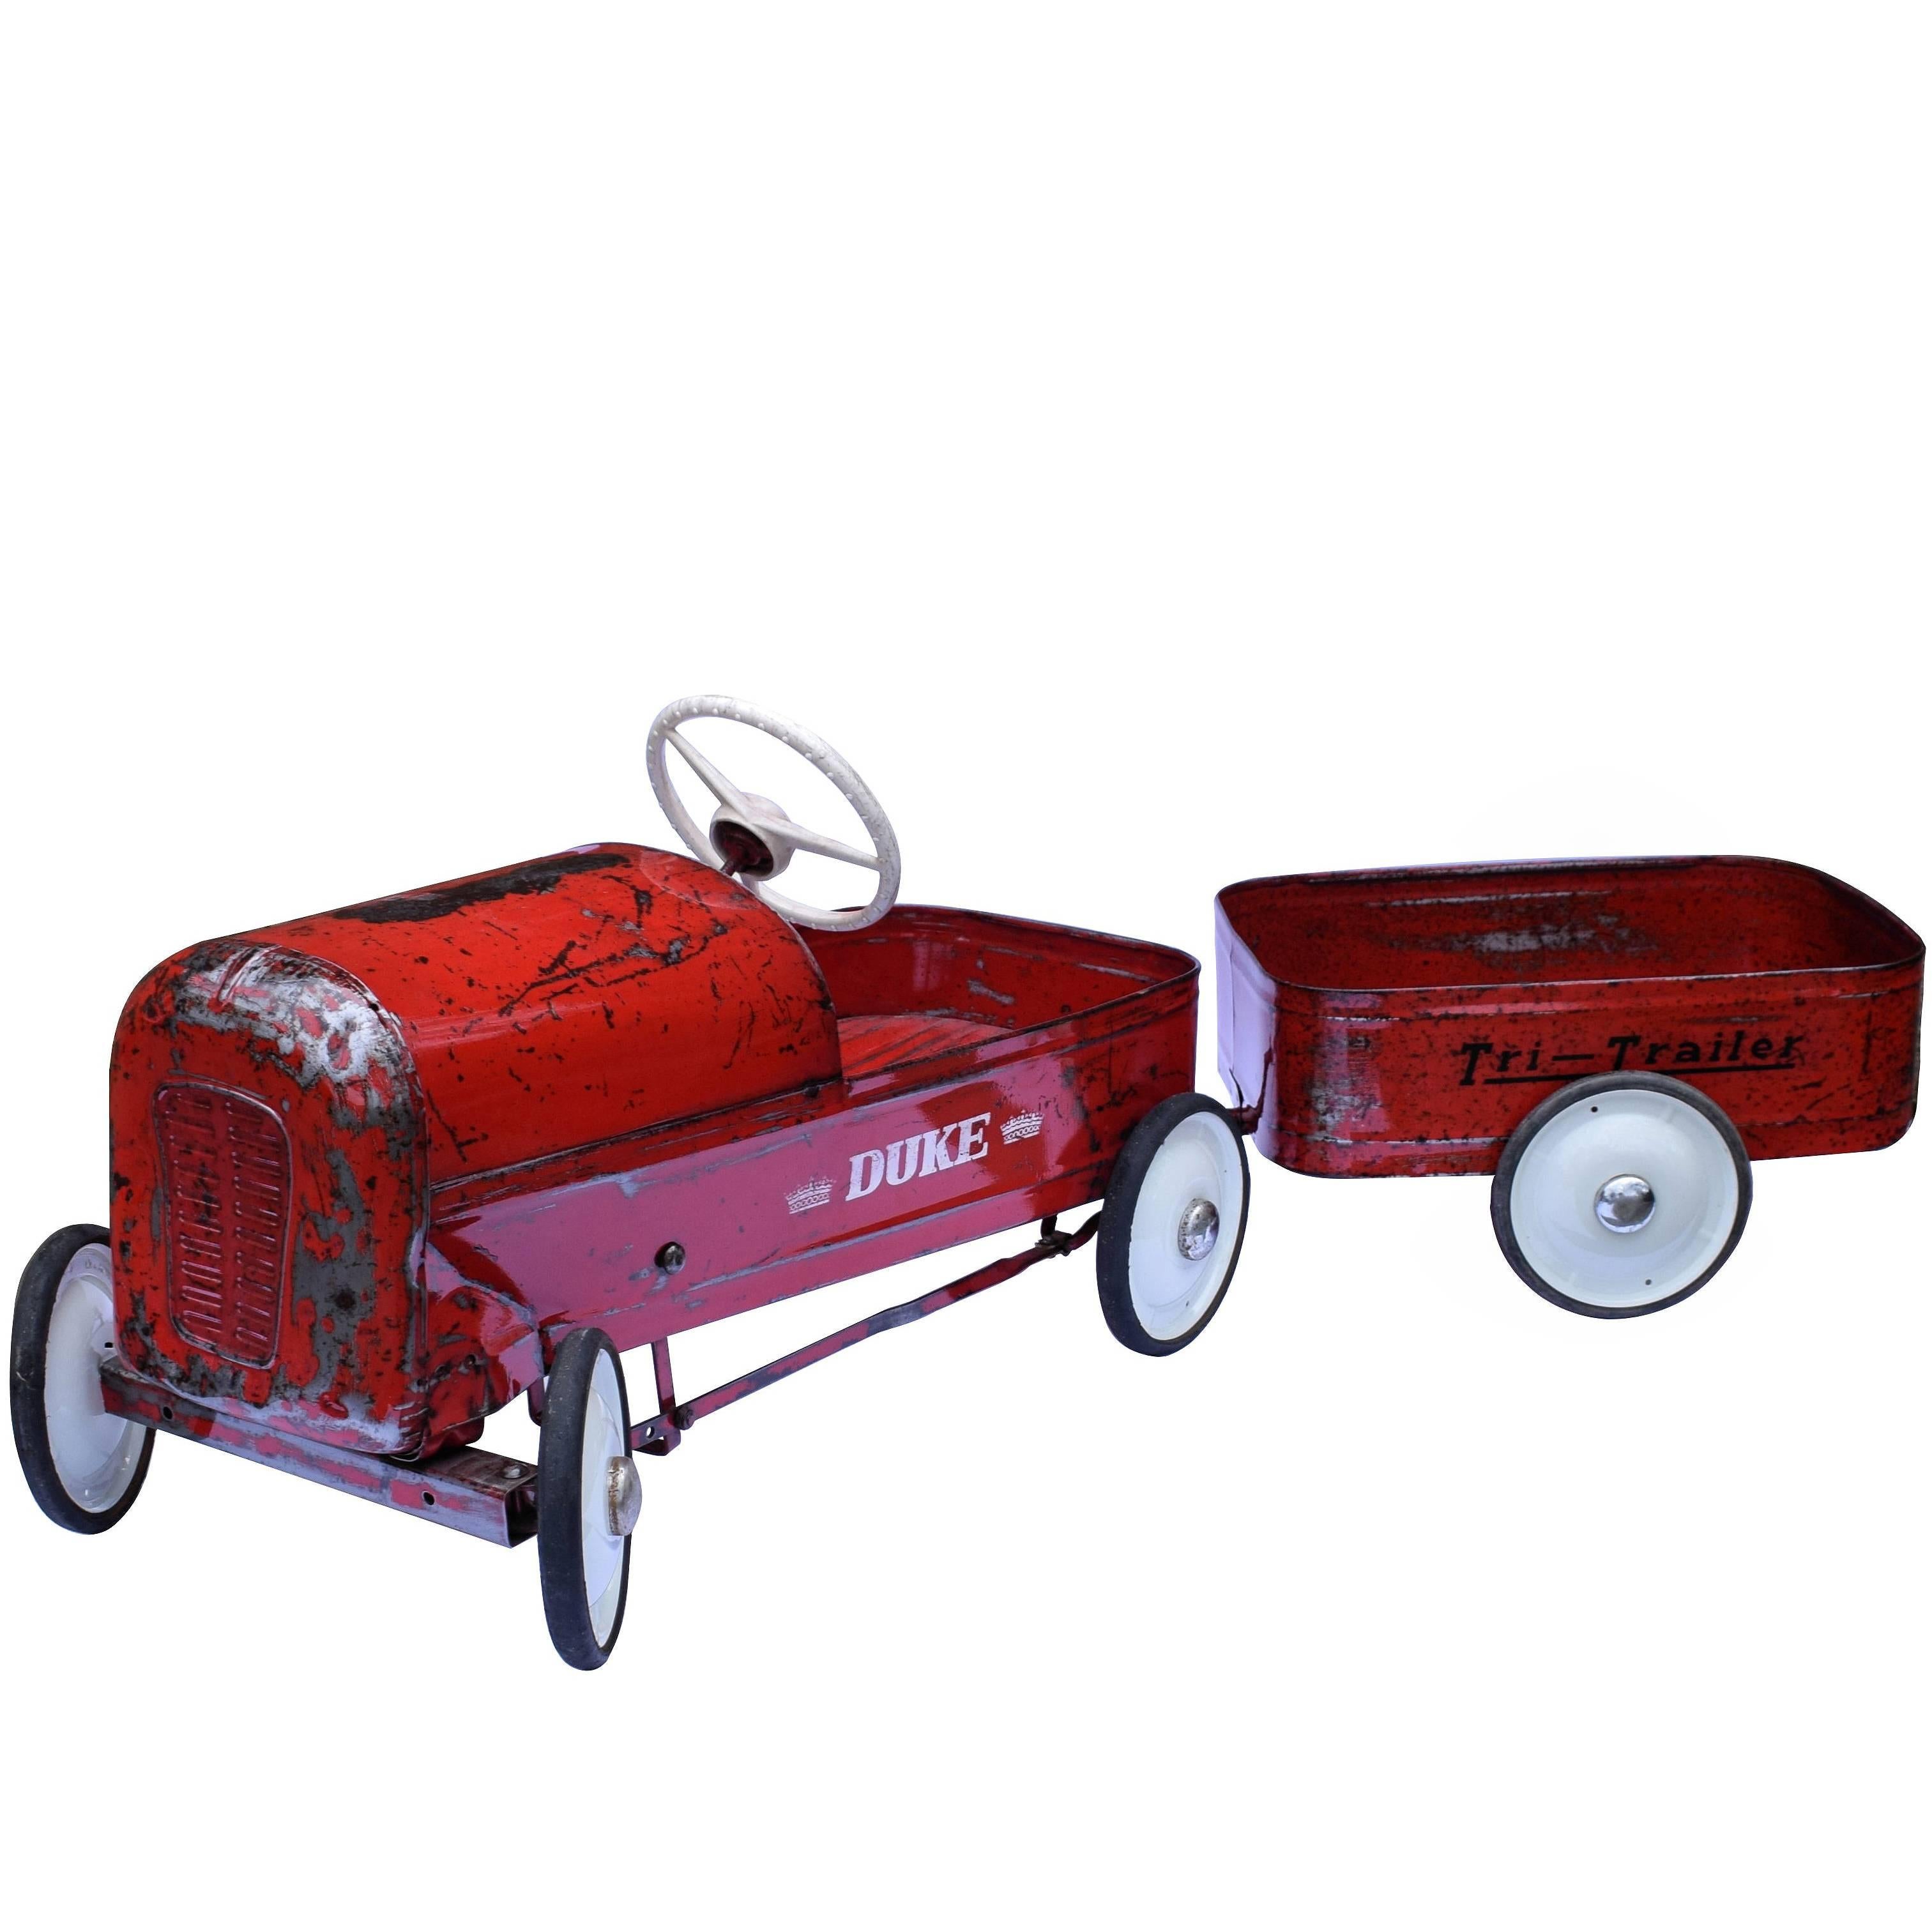 English 'Duke' Childs pedal Car by Triang with Tri Trailer